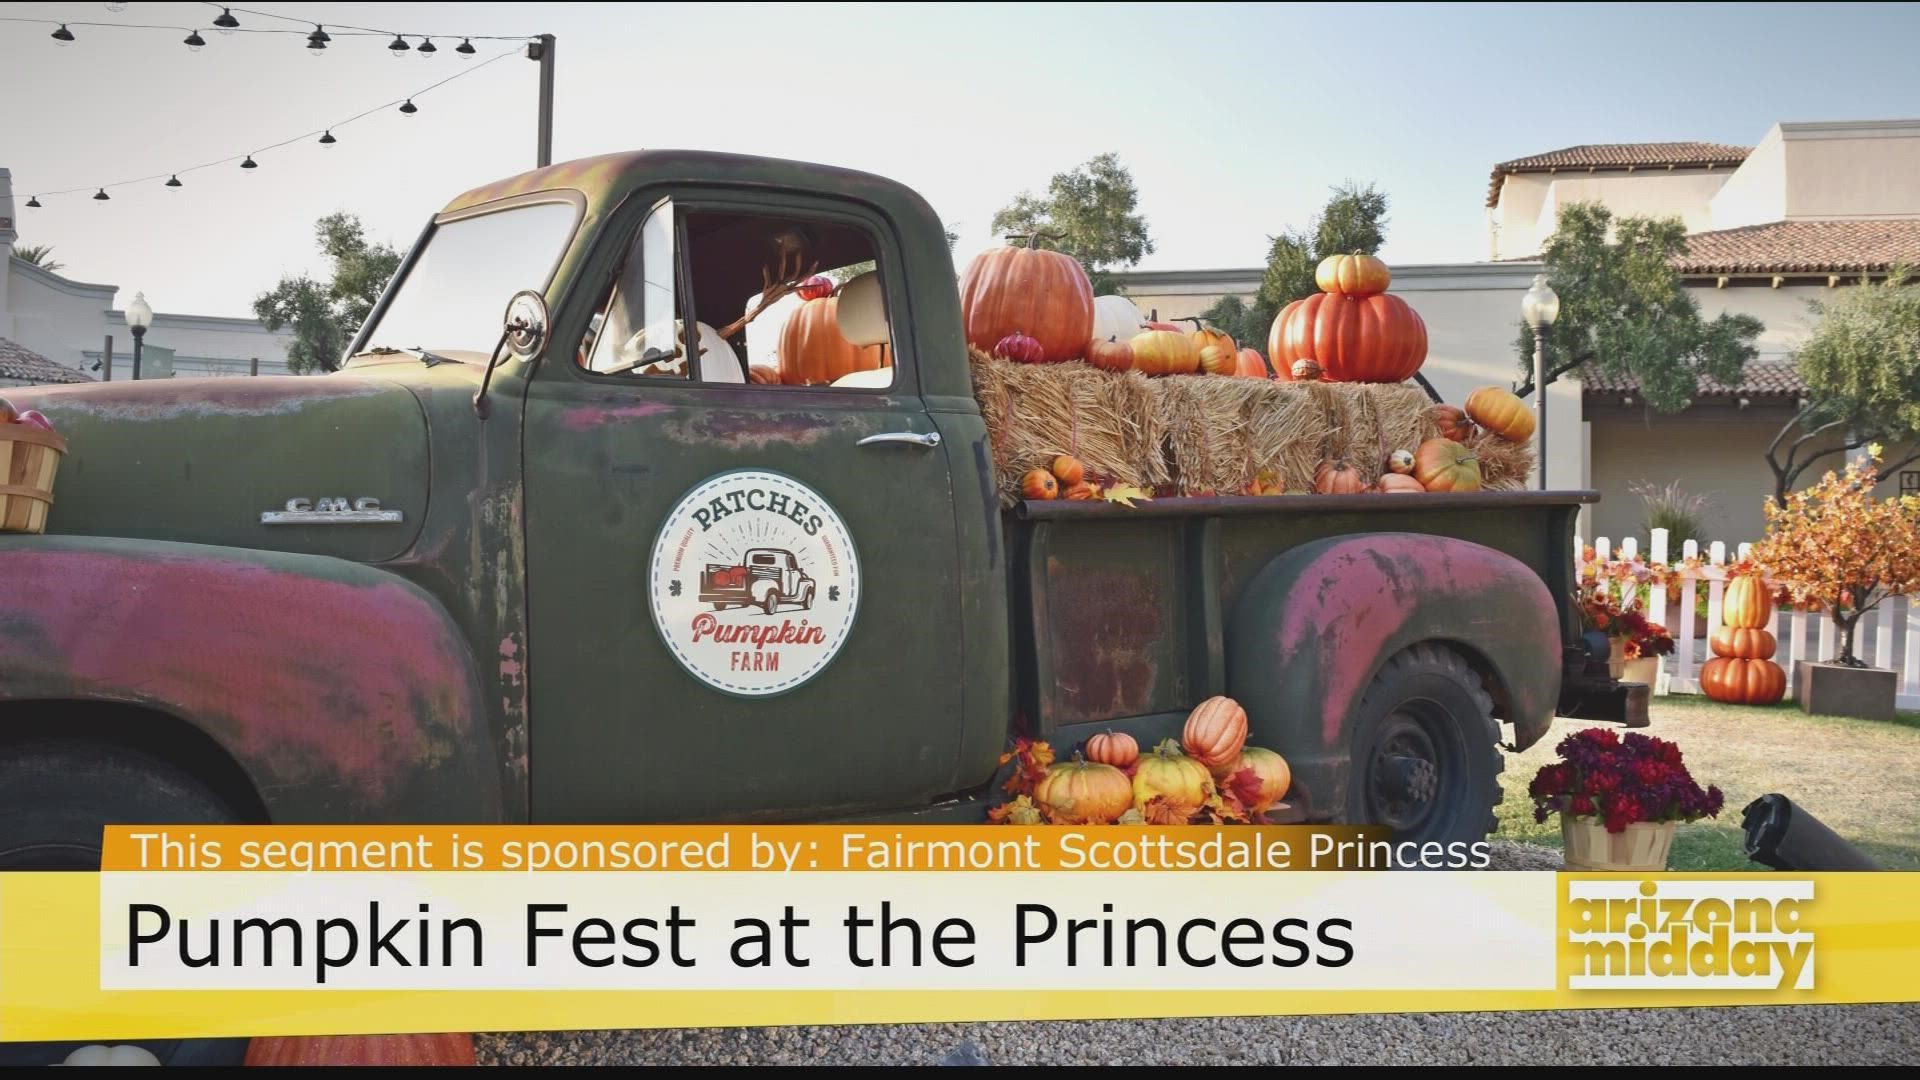 Pam Gilbert, with the Fairmont Scottsdale Princess, shows us all the fun families can have at this year's Pumpkin Fest from the Pumpkin Patch to Fun Rides & s'mores